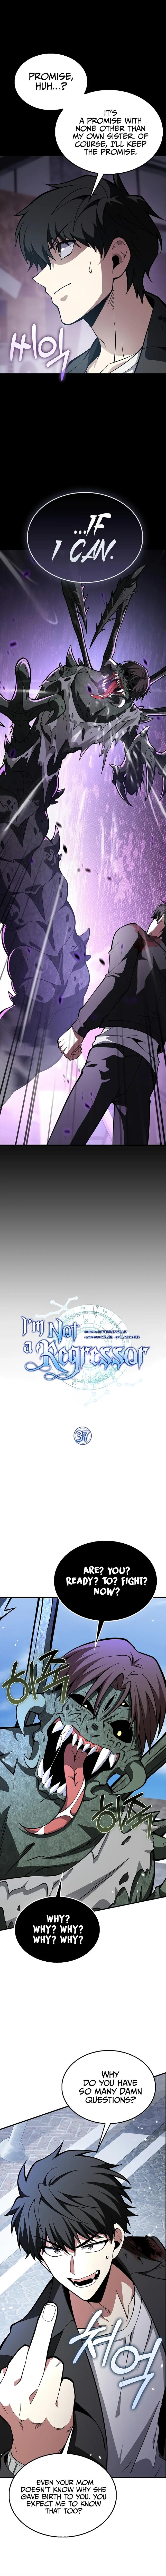 I’m Not a Regressor Chapter 37 page 2